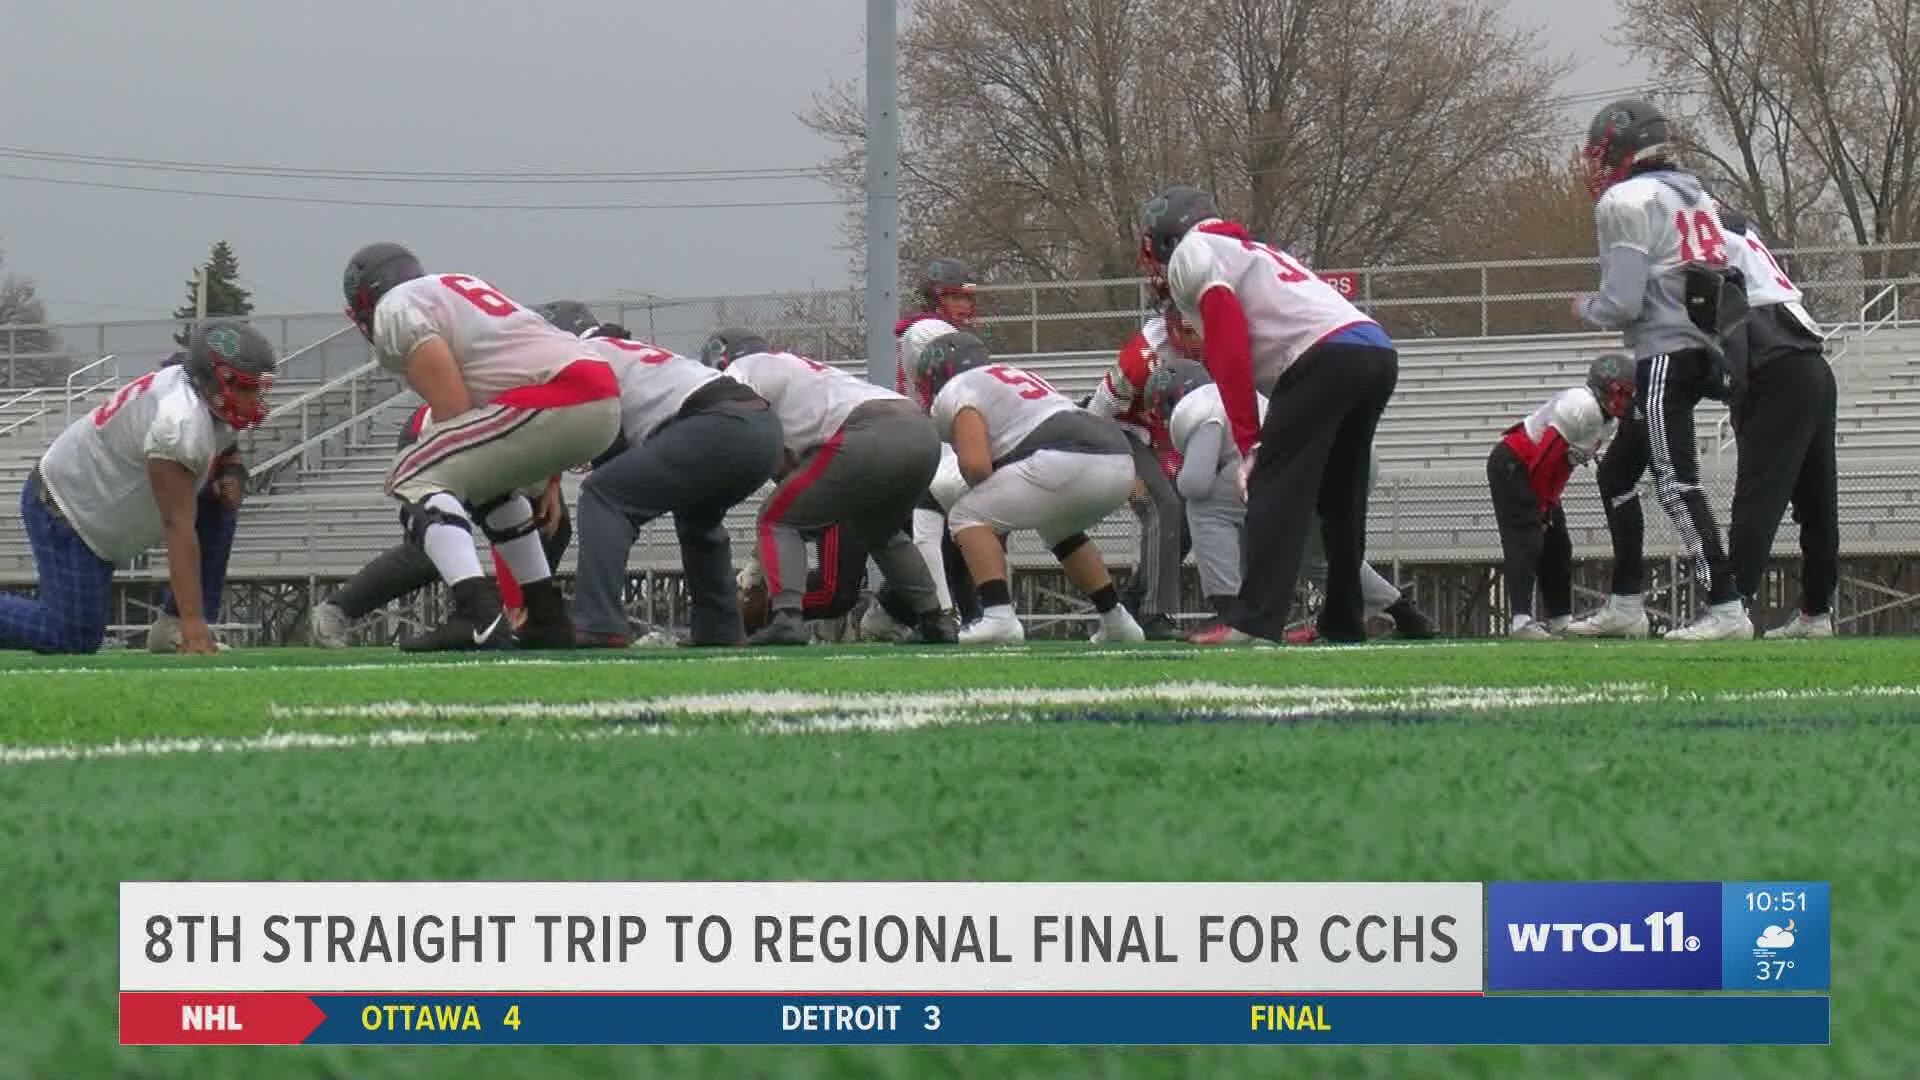 This will be the eighth consecutive year that Central Catholic will be playing in the regional finals.